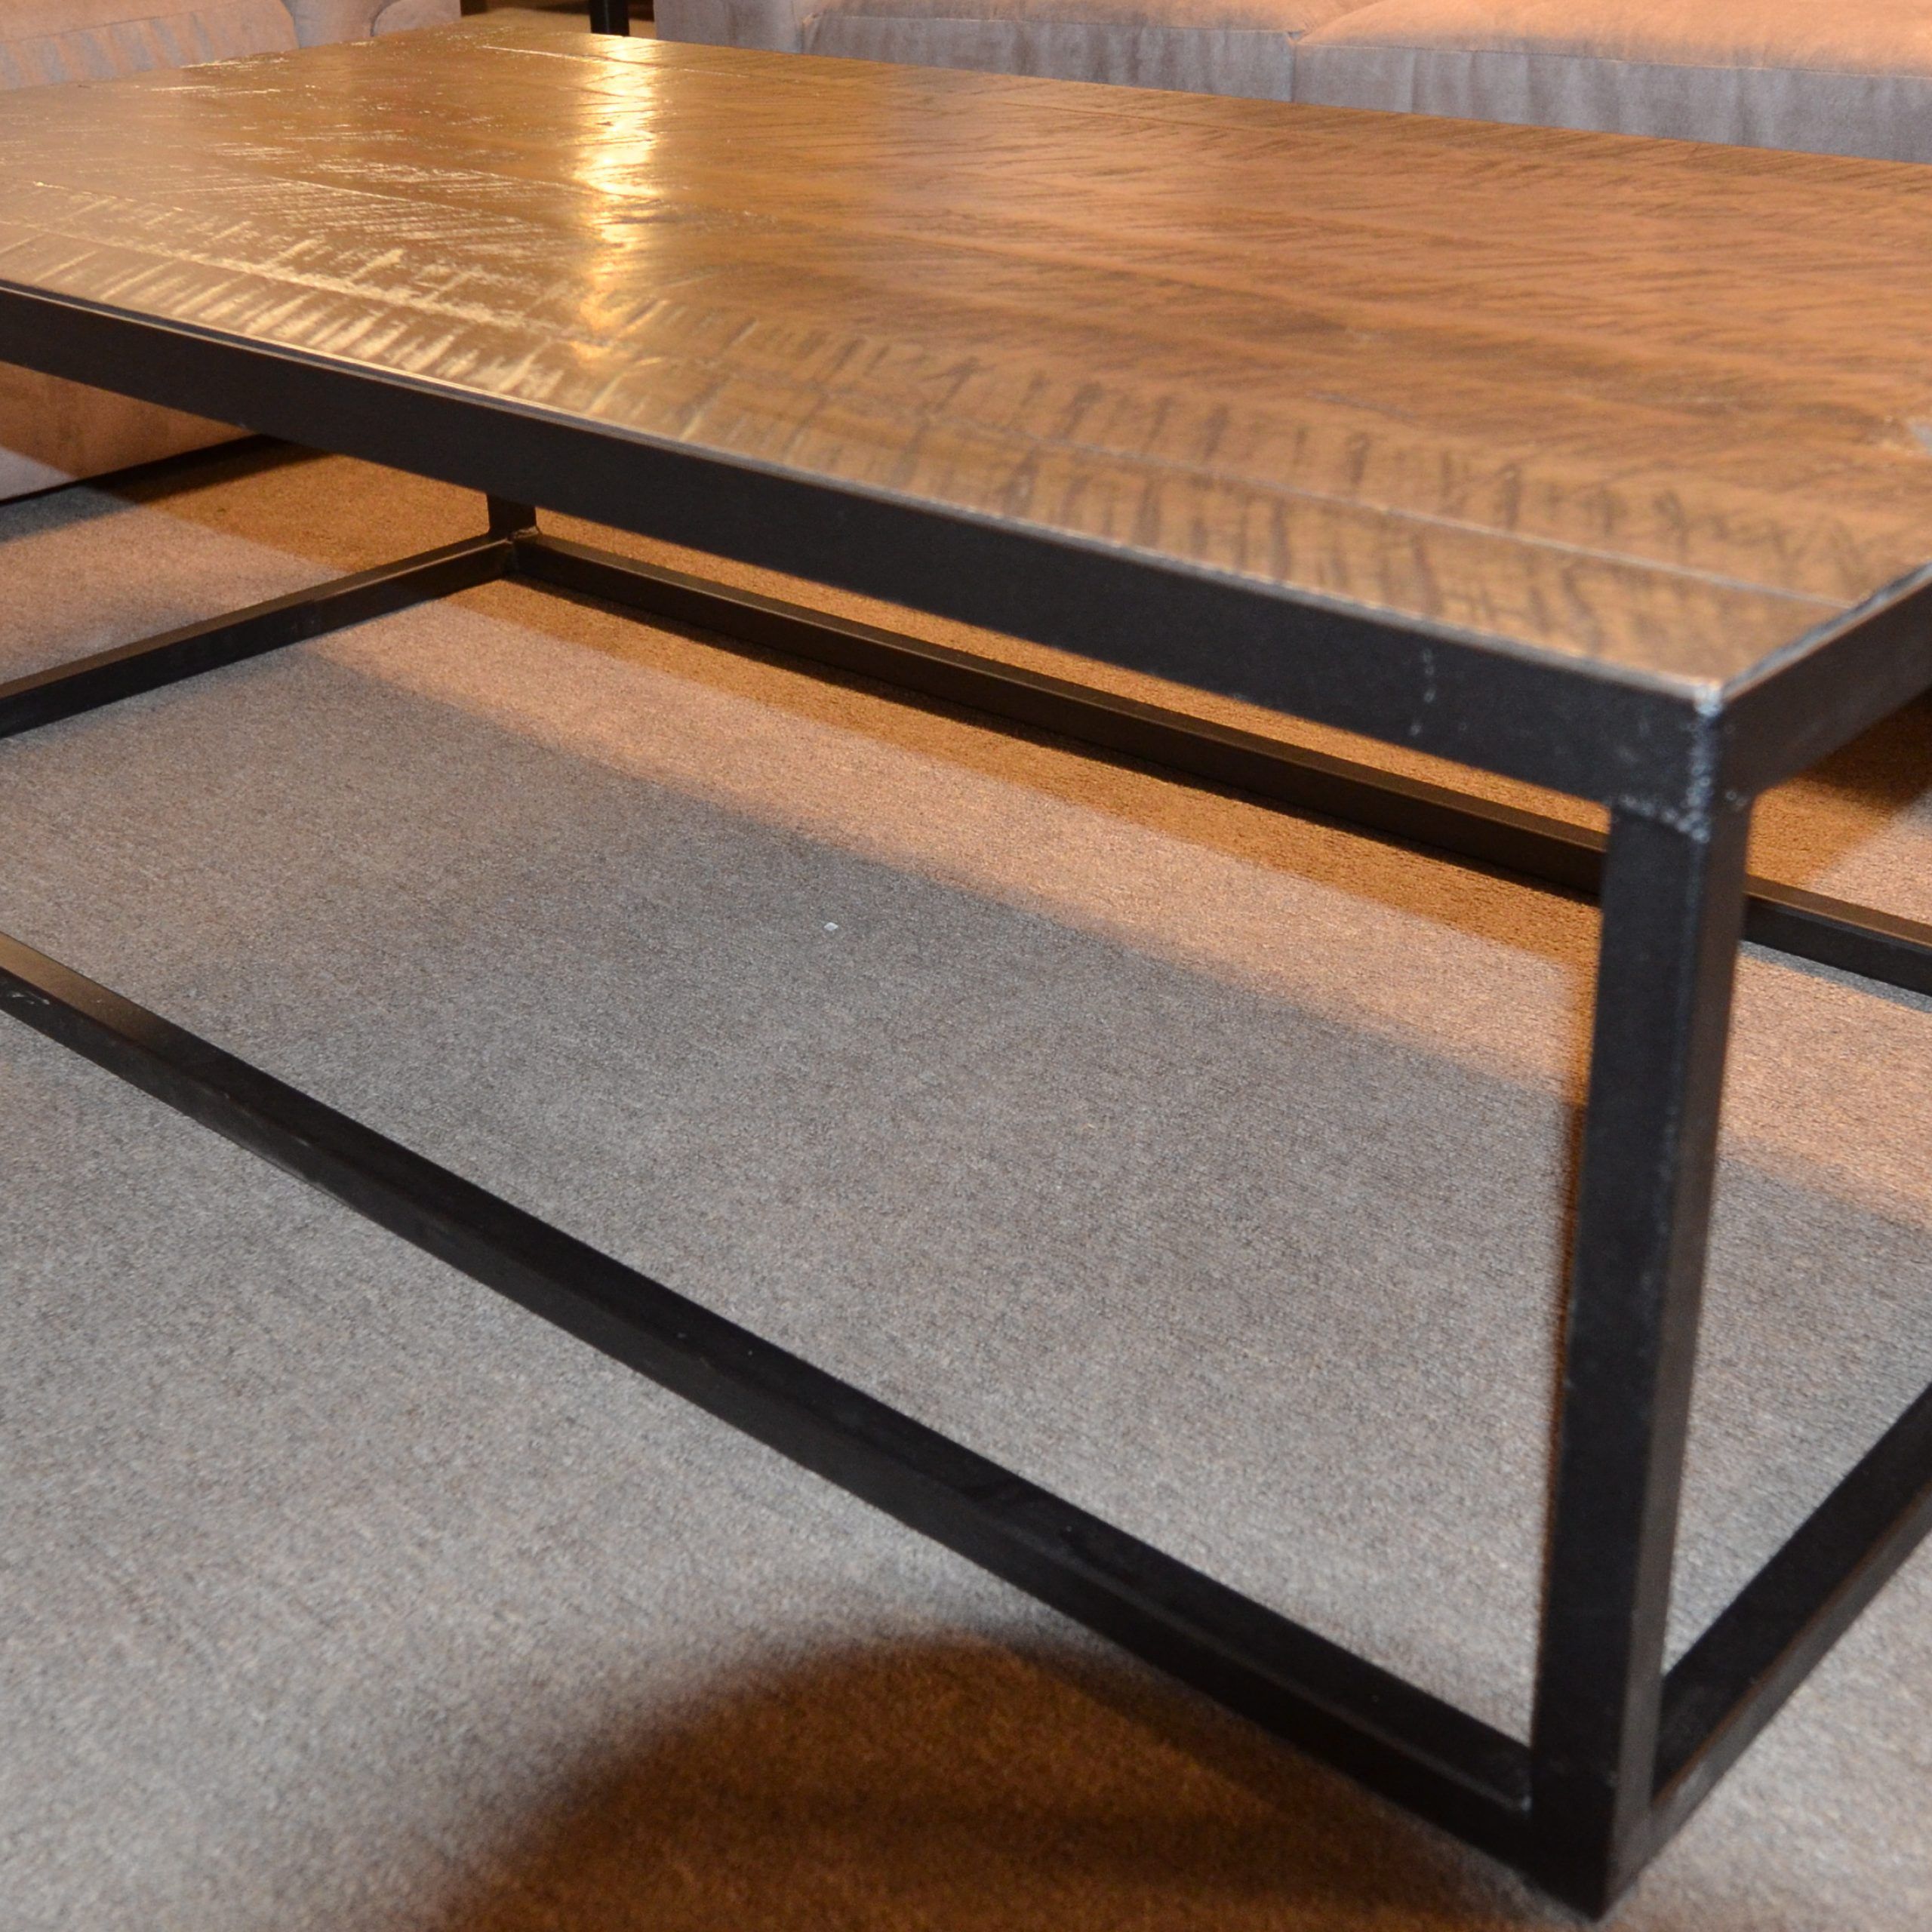 Most Popular Coffee Tables With Metal Legs Pertaining To Metal Leg Coffee Table – Brices Furniture (View 6 of 10)